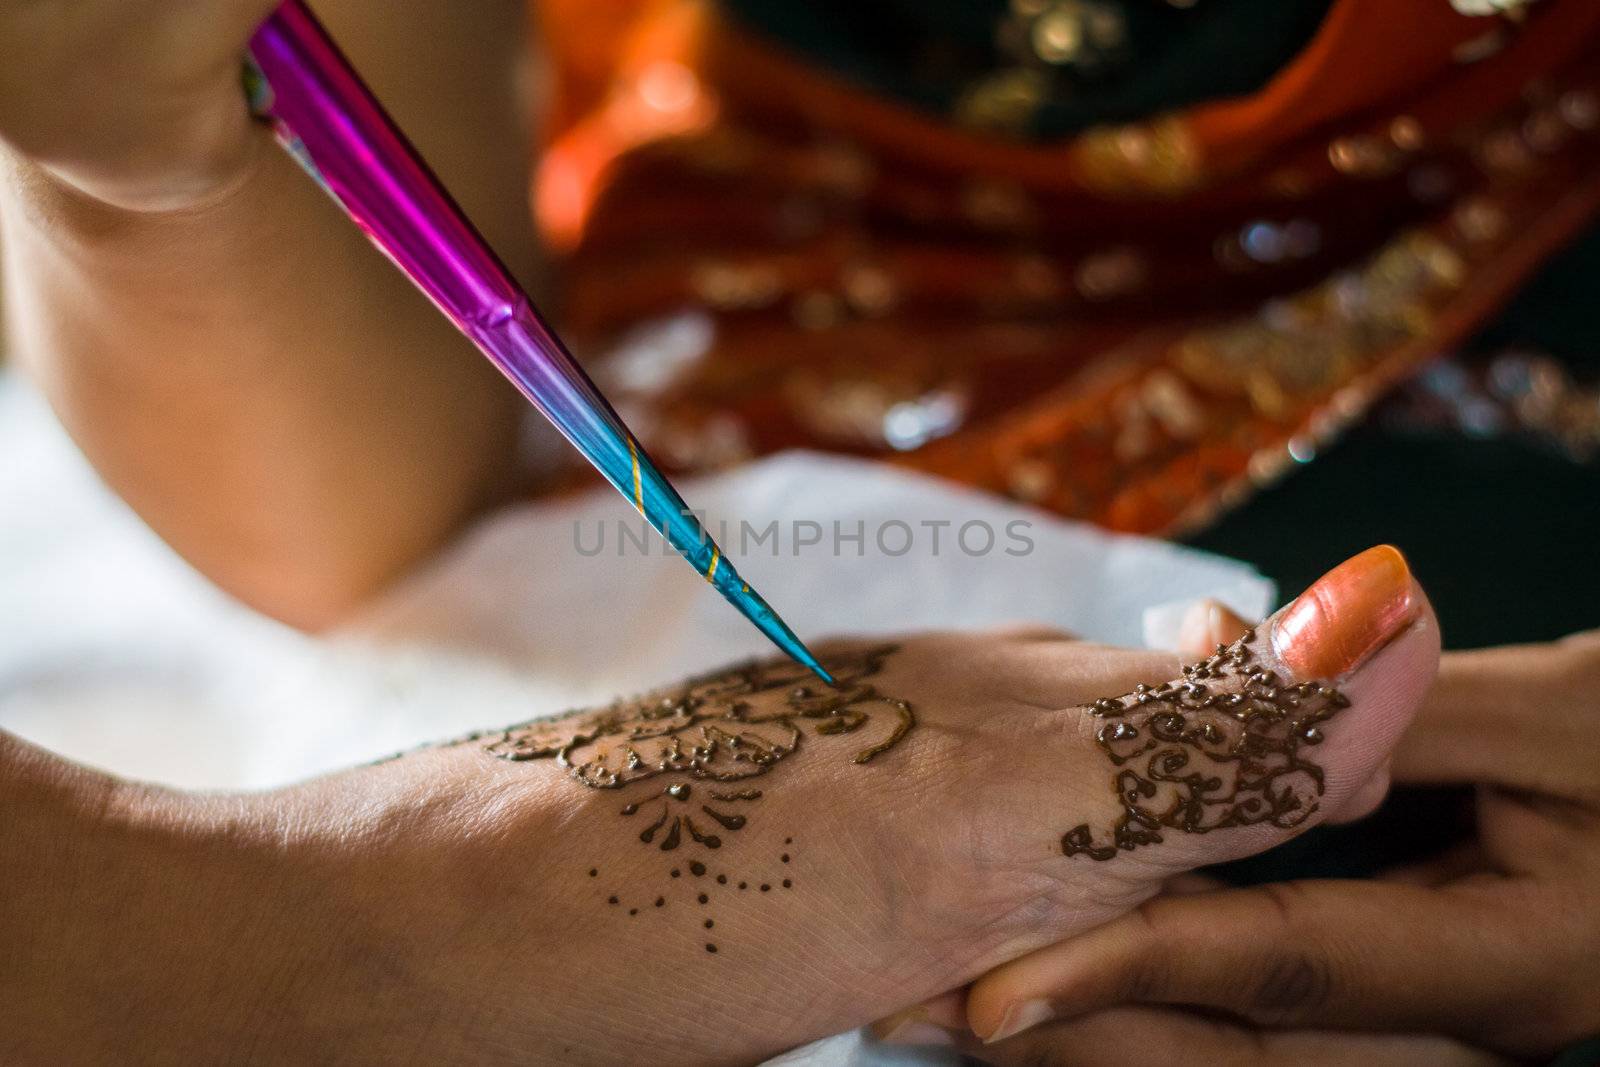 On the "Night of Mehndi" the bride's feet are decorated with elaborate designs with henna tattoo before the night of the wedding